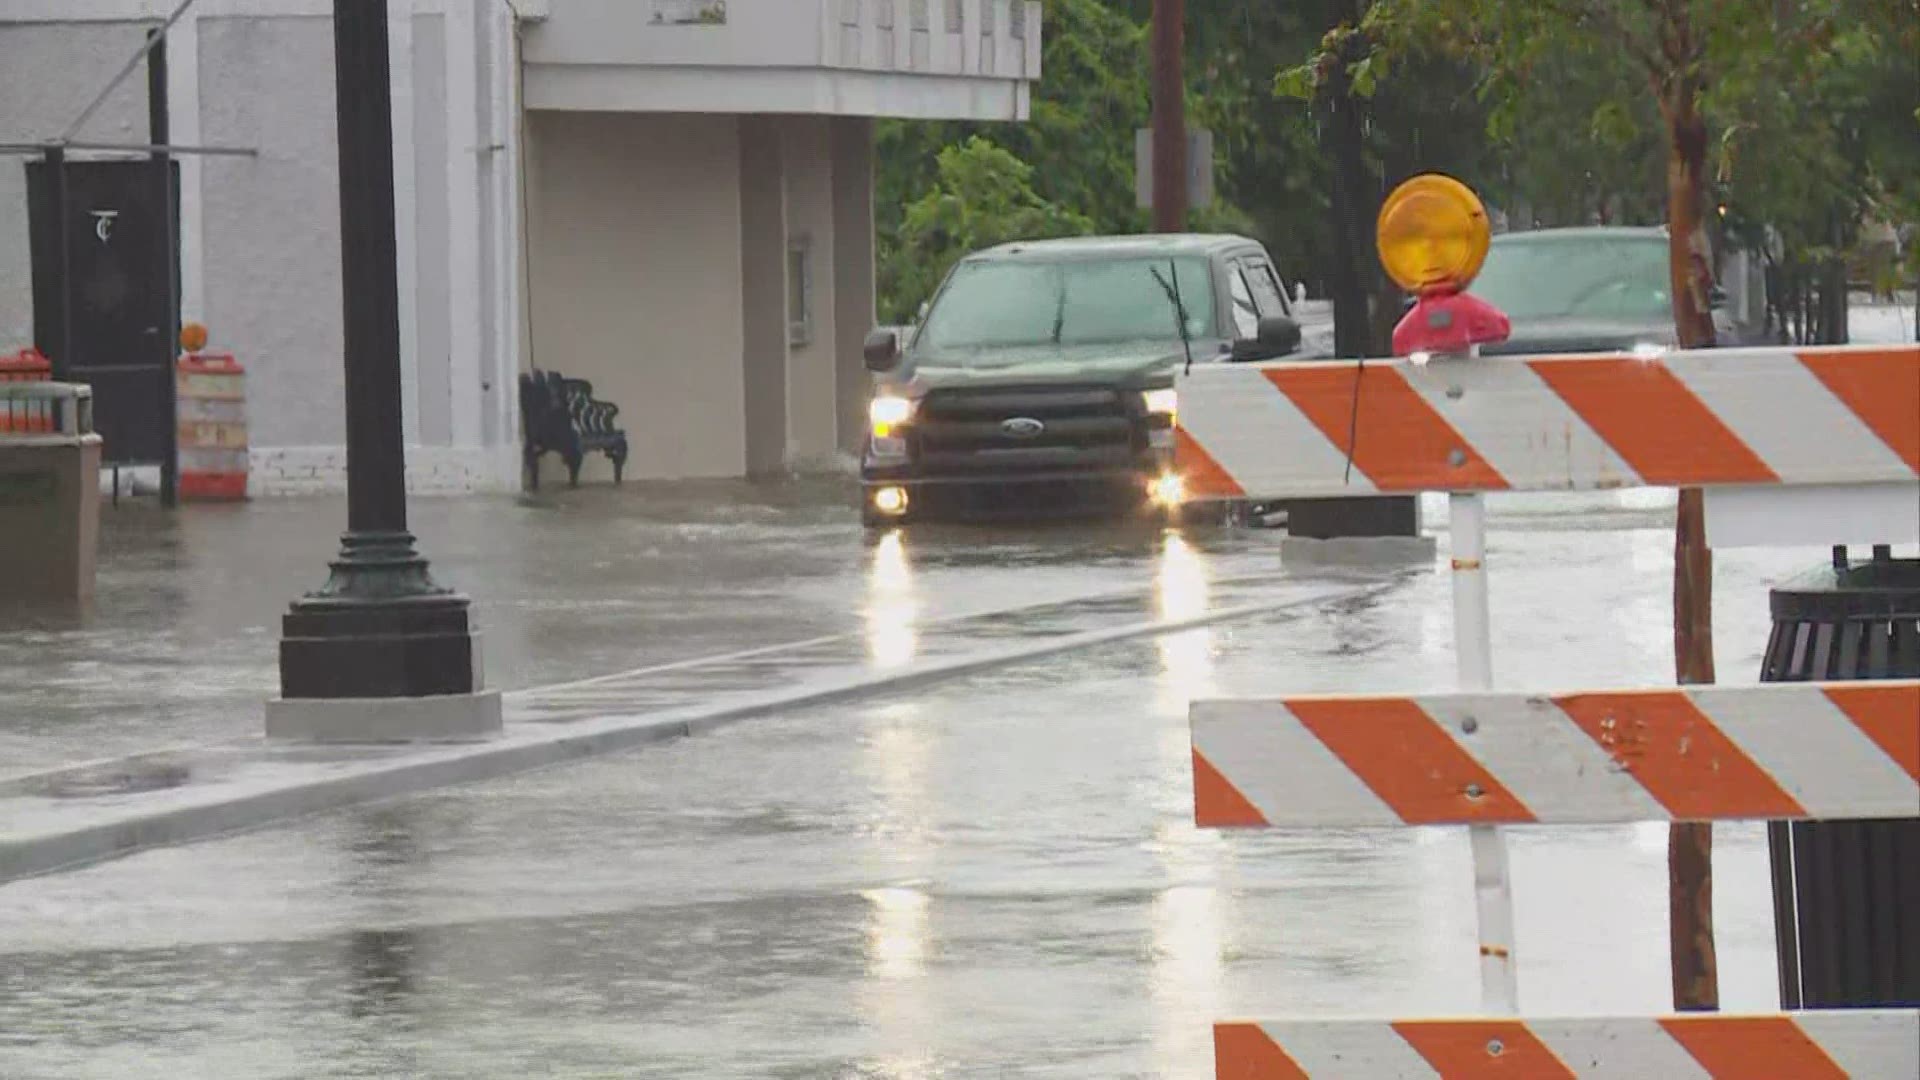 Heavy rain fell in the New Orleans area, including parts of Kenner in Rivertown where traffic was slowed as the water in the road was high.